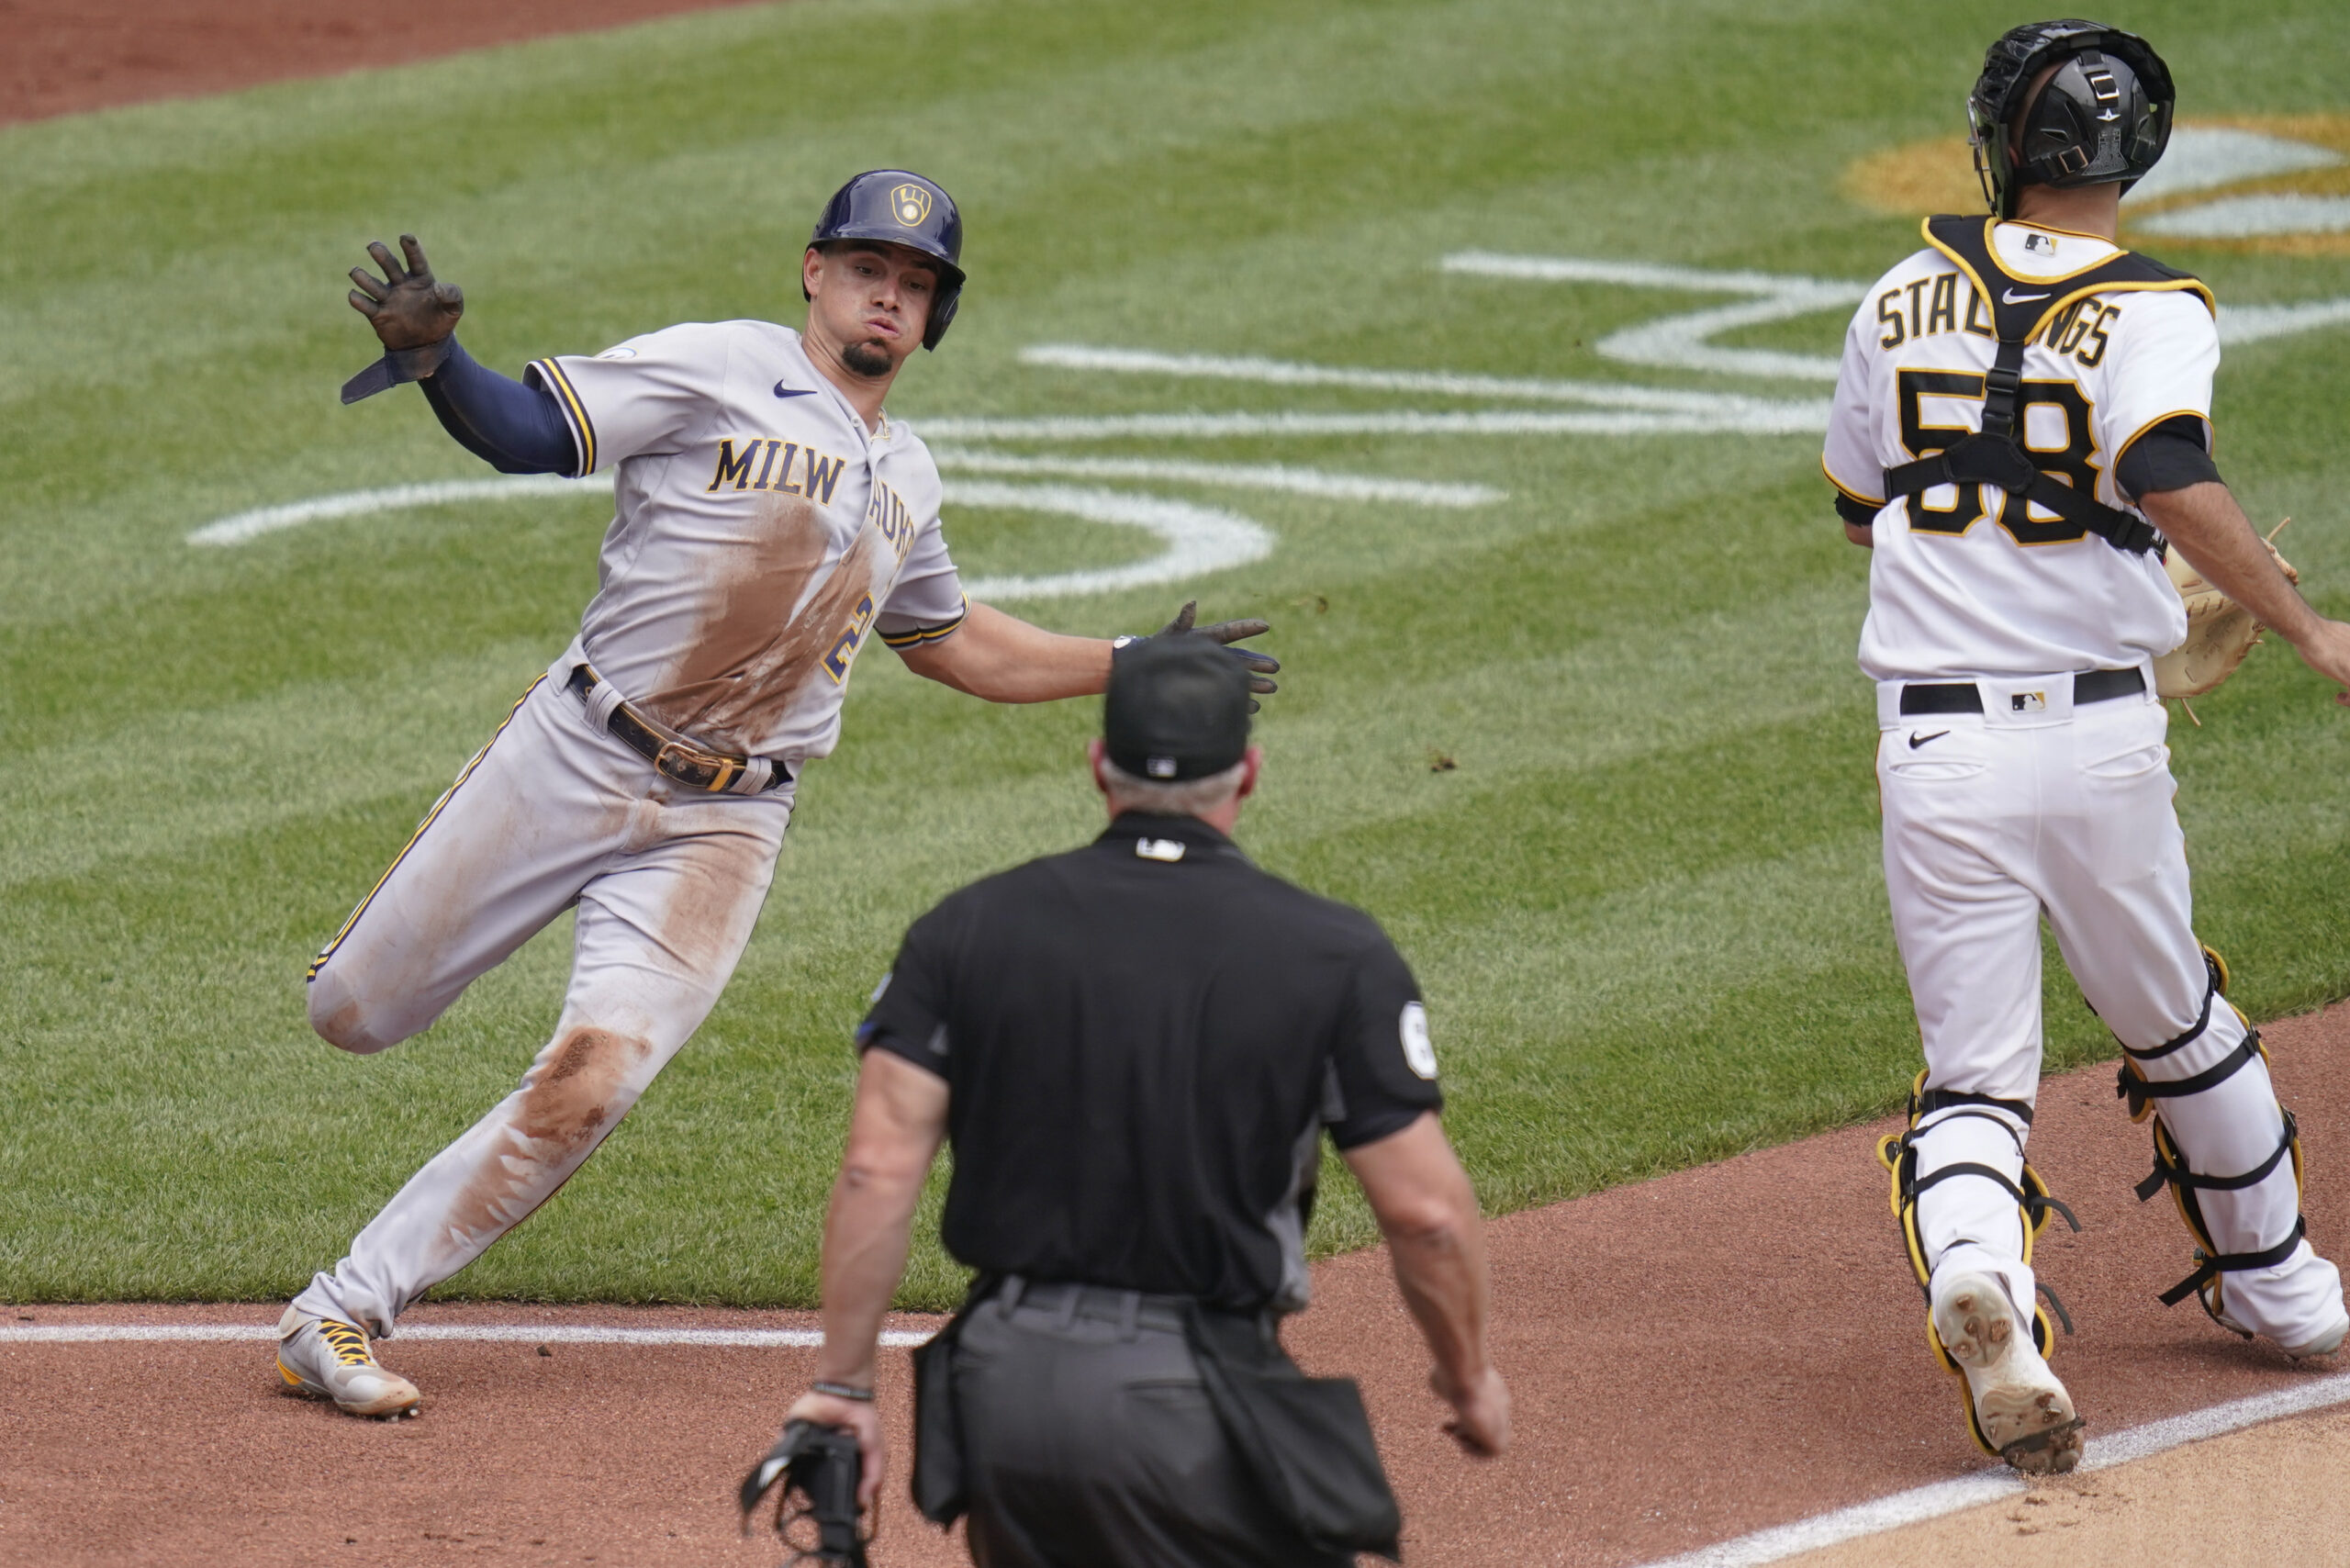 Adames scores twice as Brewers take series from Pirates, 2-1